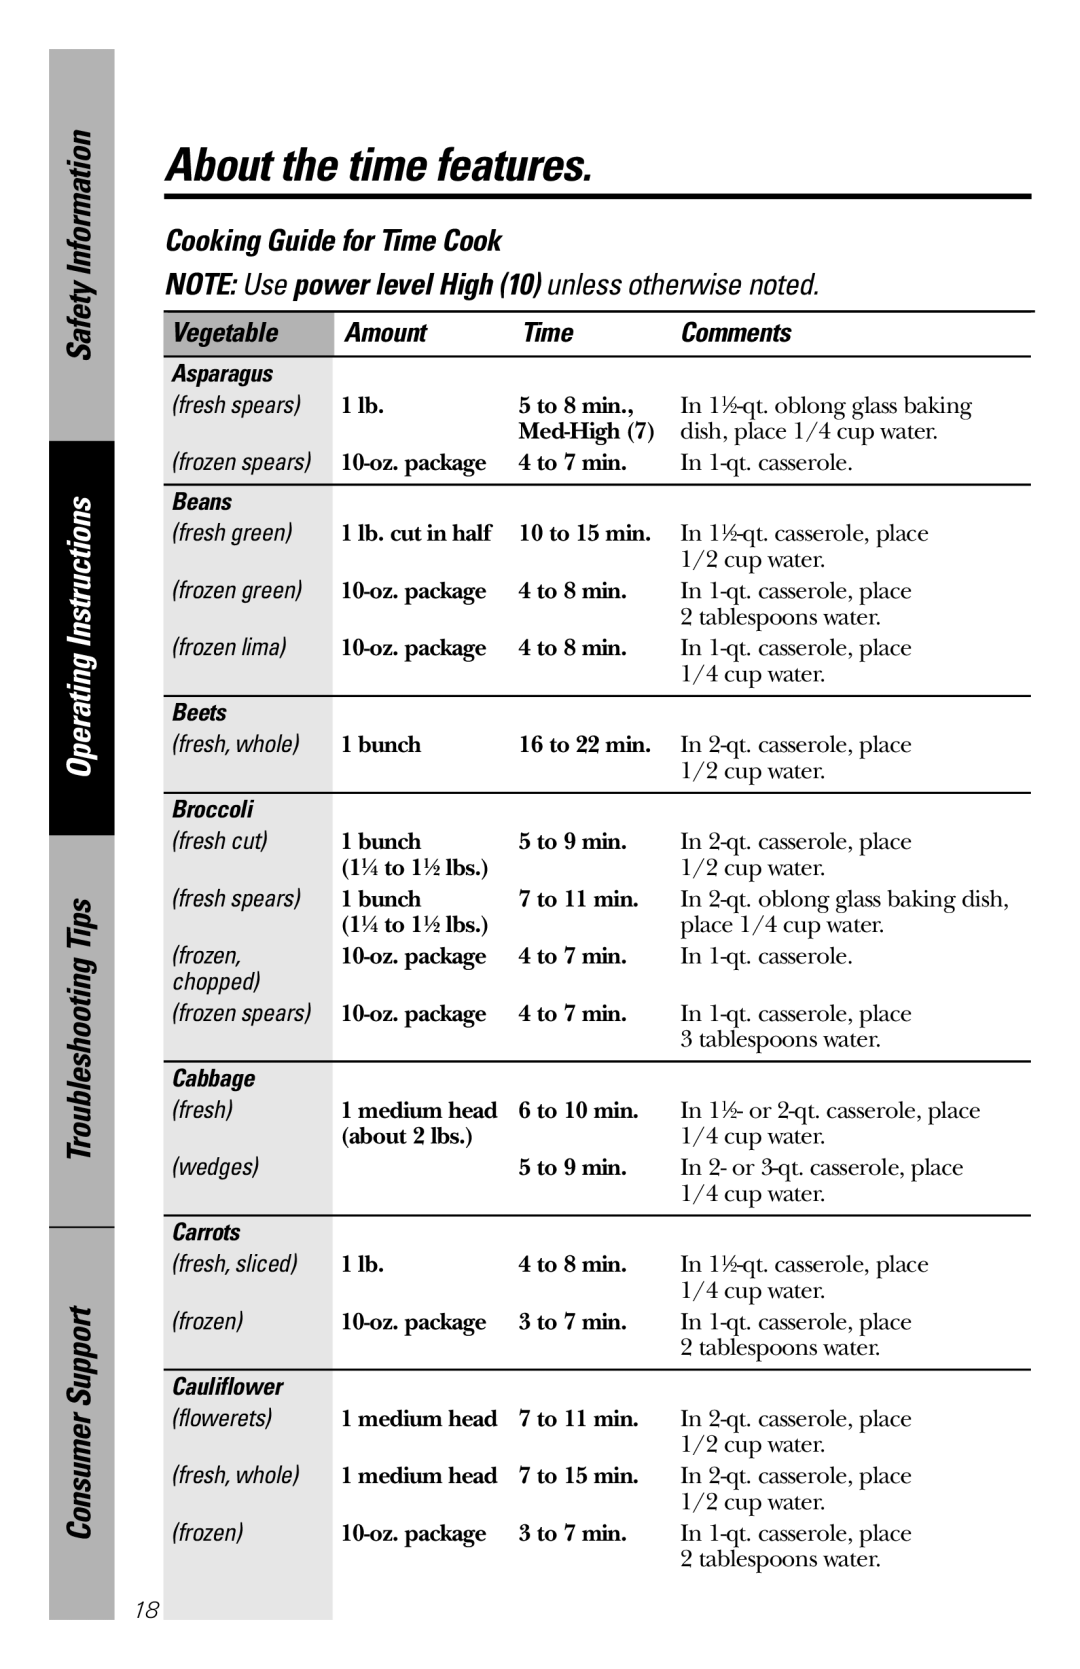 GE WES1130 Cooking Guide for Time Cook, NOTE Use power level High 10 unless otherwise noted, Vegetable, Amount, Comments 